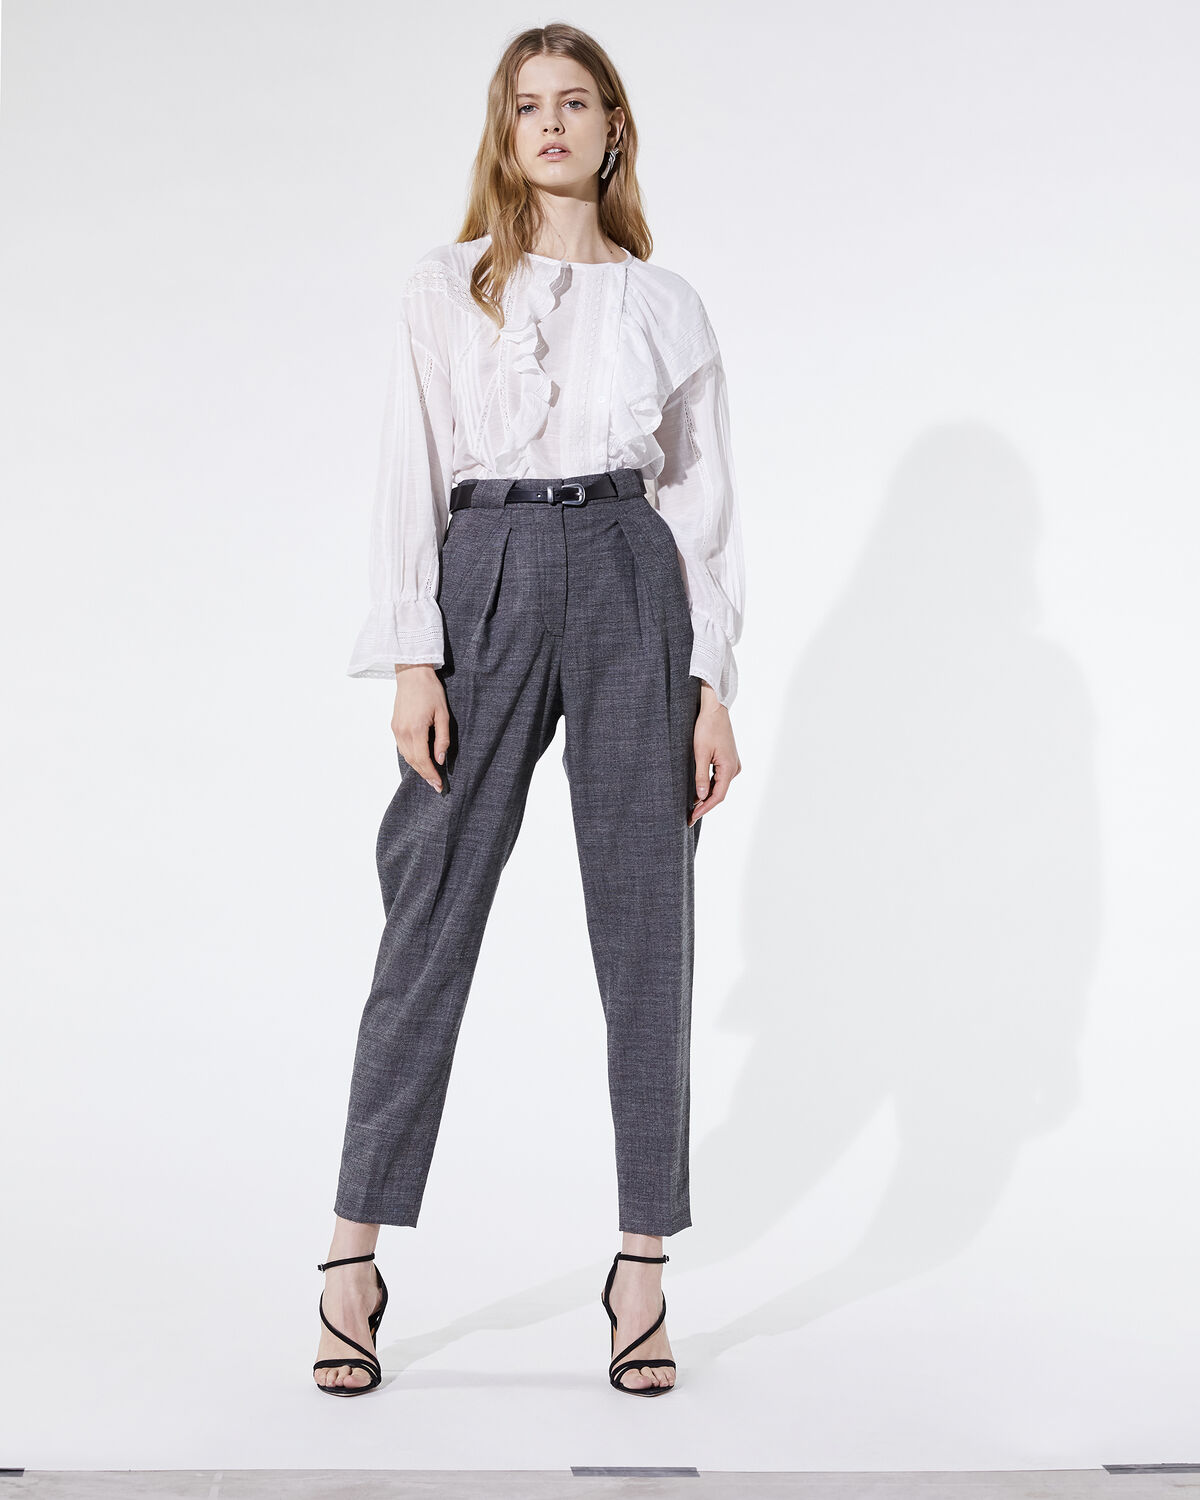 Photo of IRO Paris Orlea Trousers Grey - Inspired By The Men's Wardrobe, These Virgin Wool Clip Pants Are A Must-have Of The Season. Combine Them With A Linen Top And A Pair Of Pumps For A Resolutely Modern And Feminine Look. Fall Winter 19